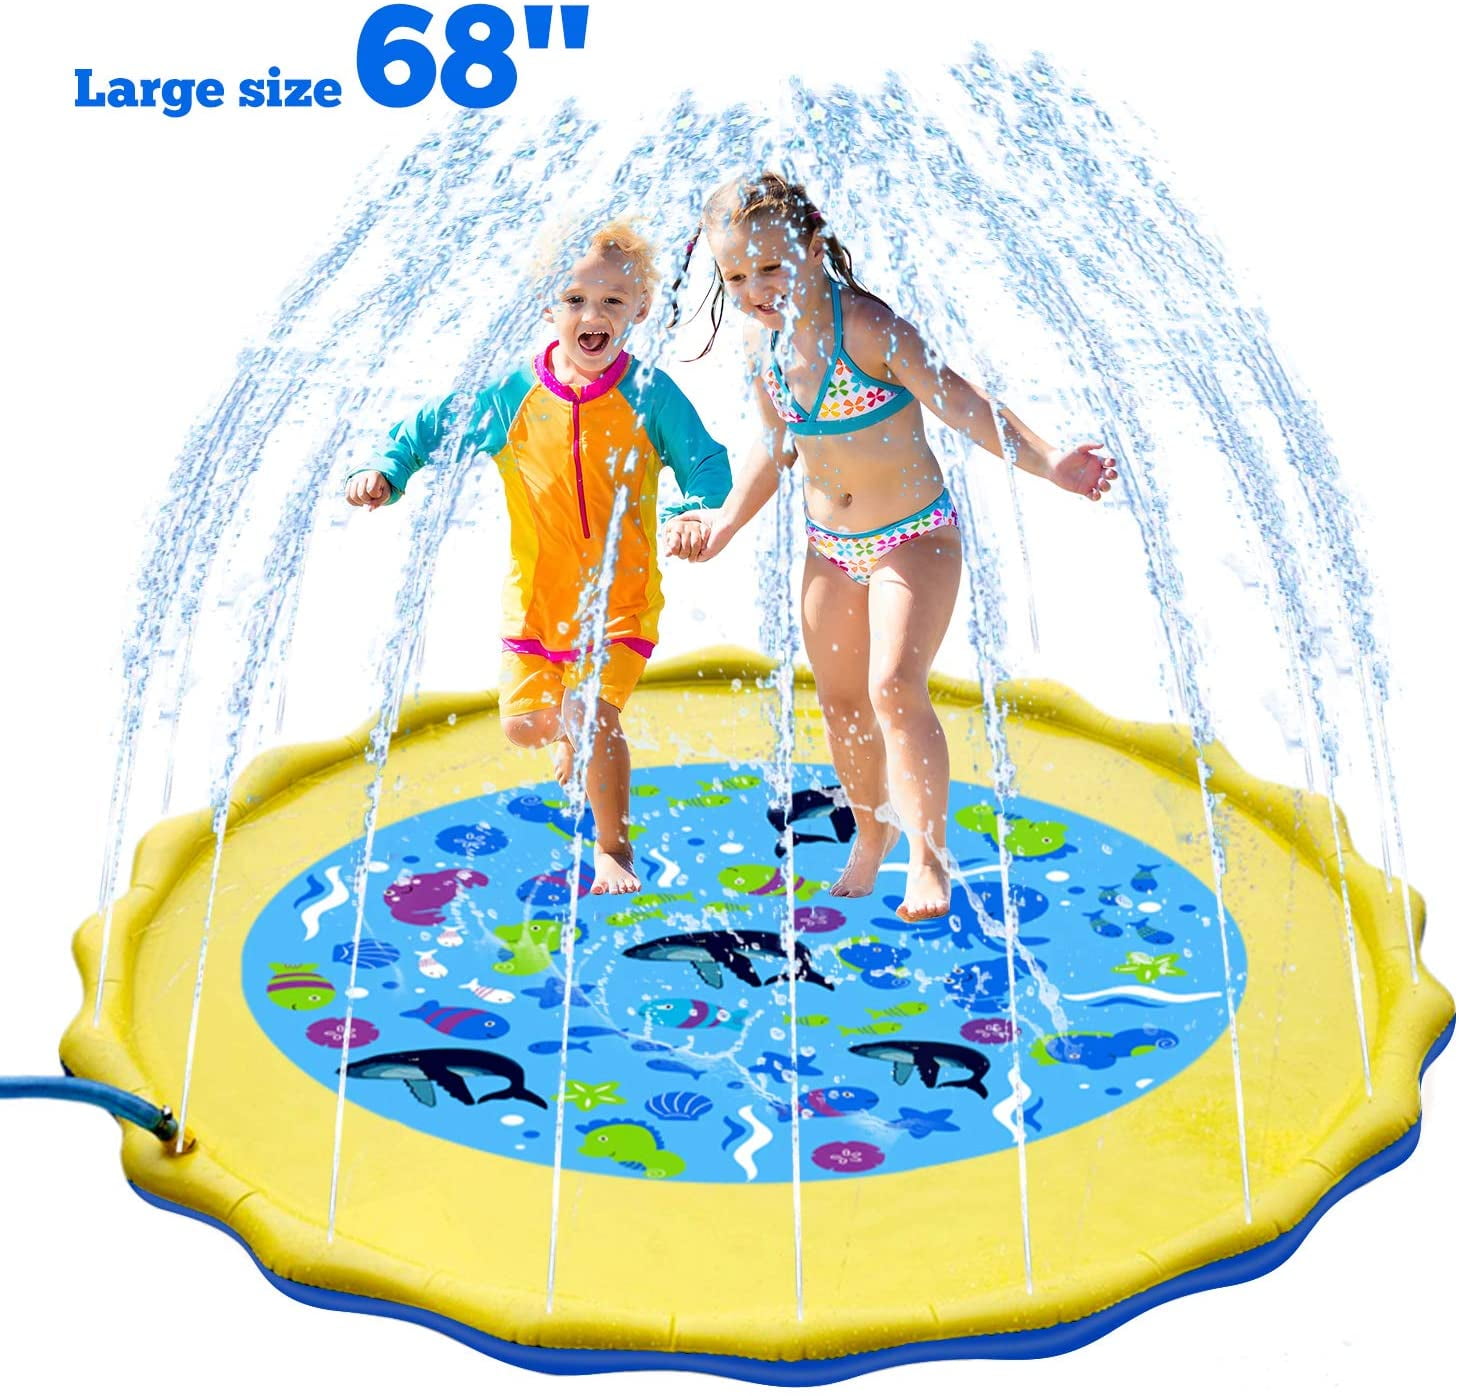 hirsrian Sprinkle and Splash Play Mat Summer Garden Outdoor Spray Toys Inflatable Sprinkler Mat for Toddlers Kids Pets